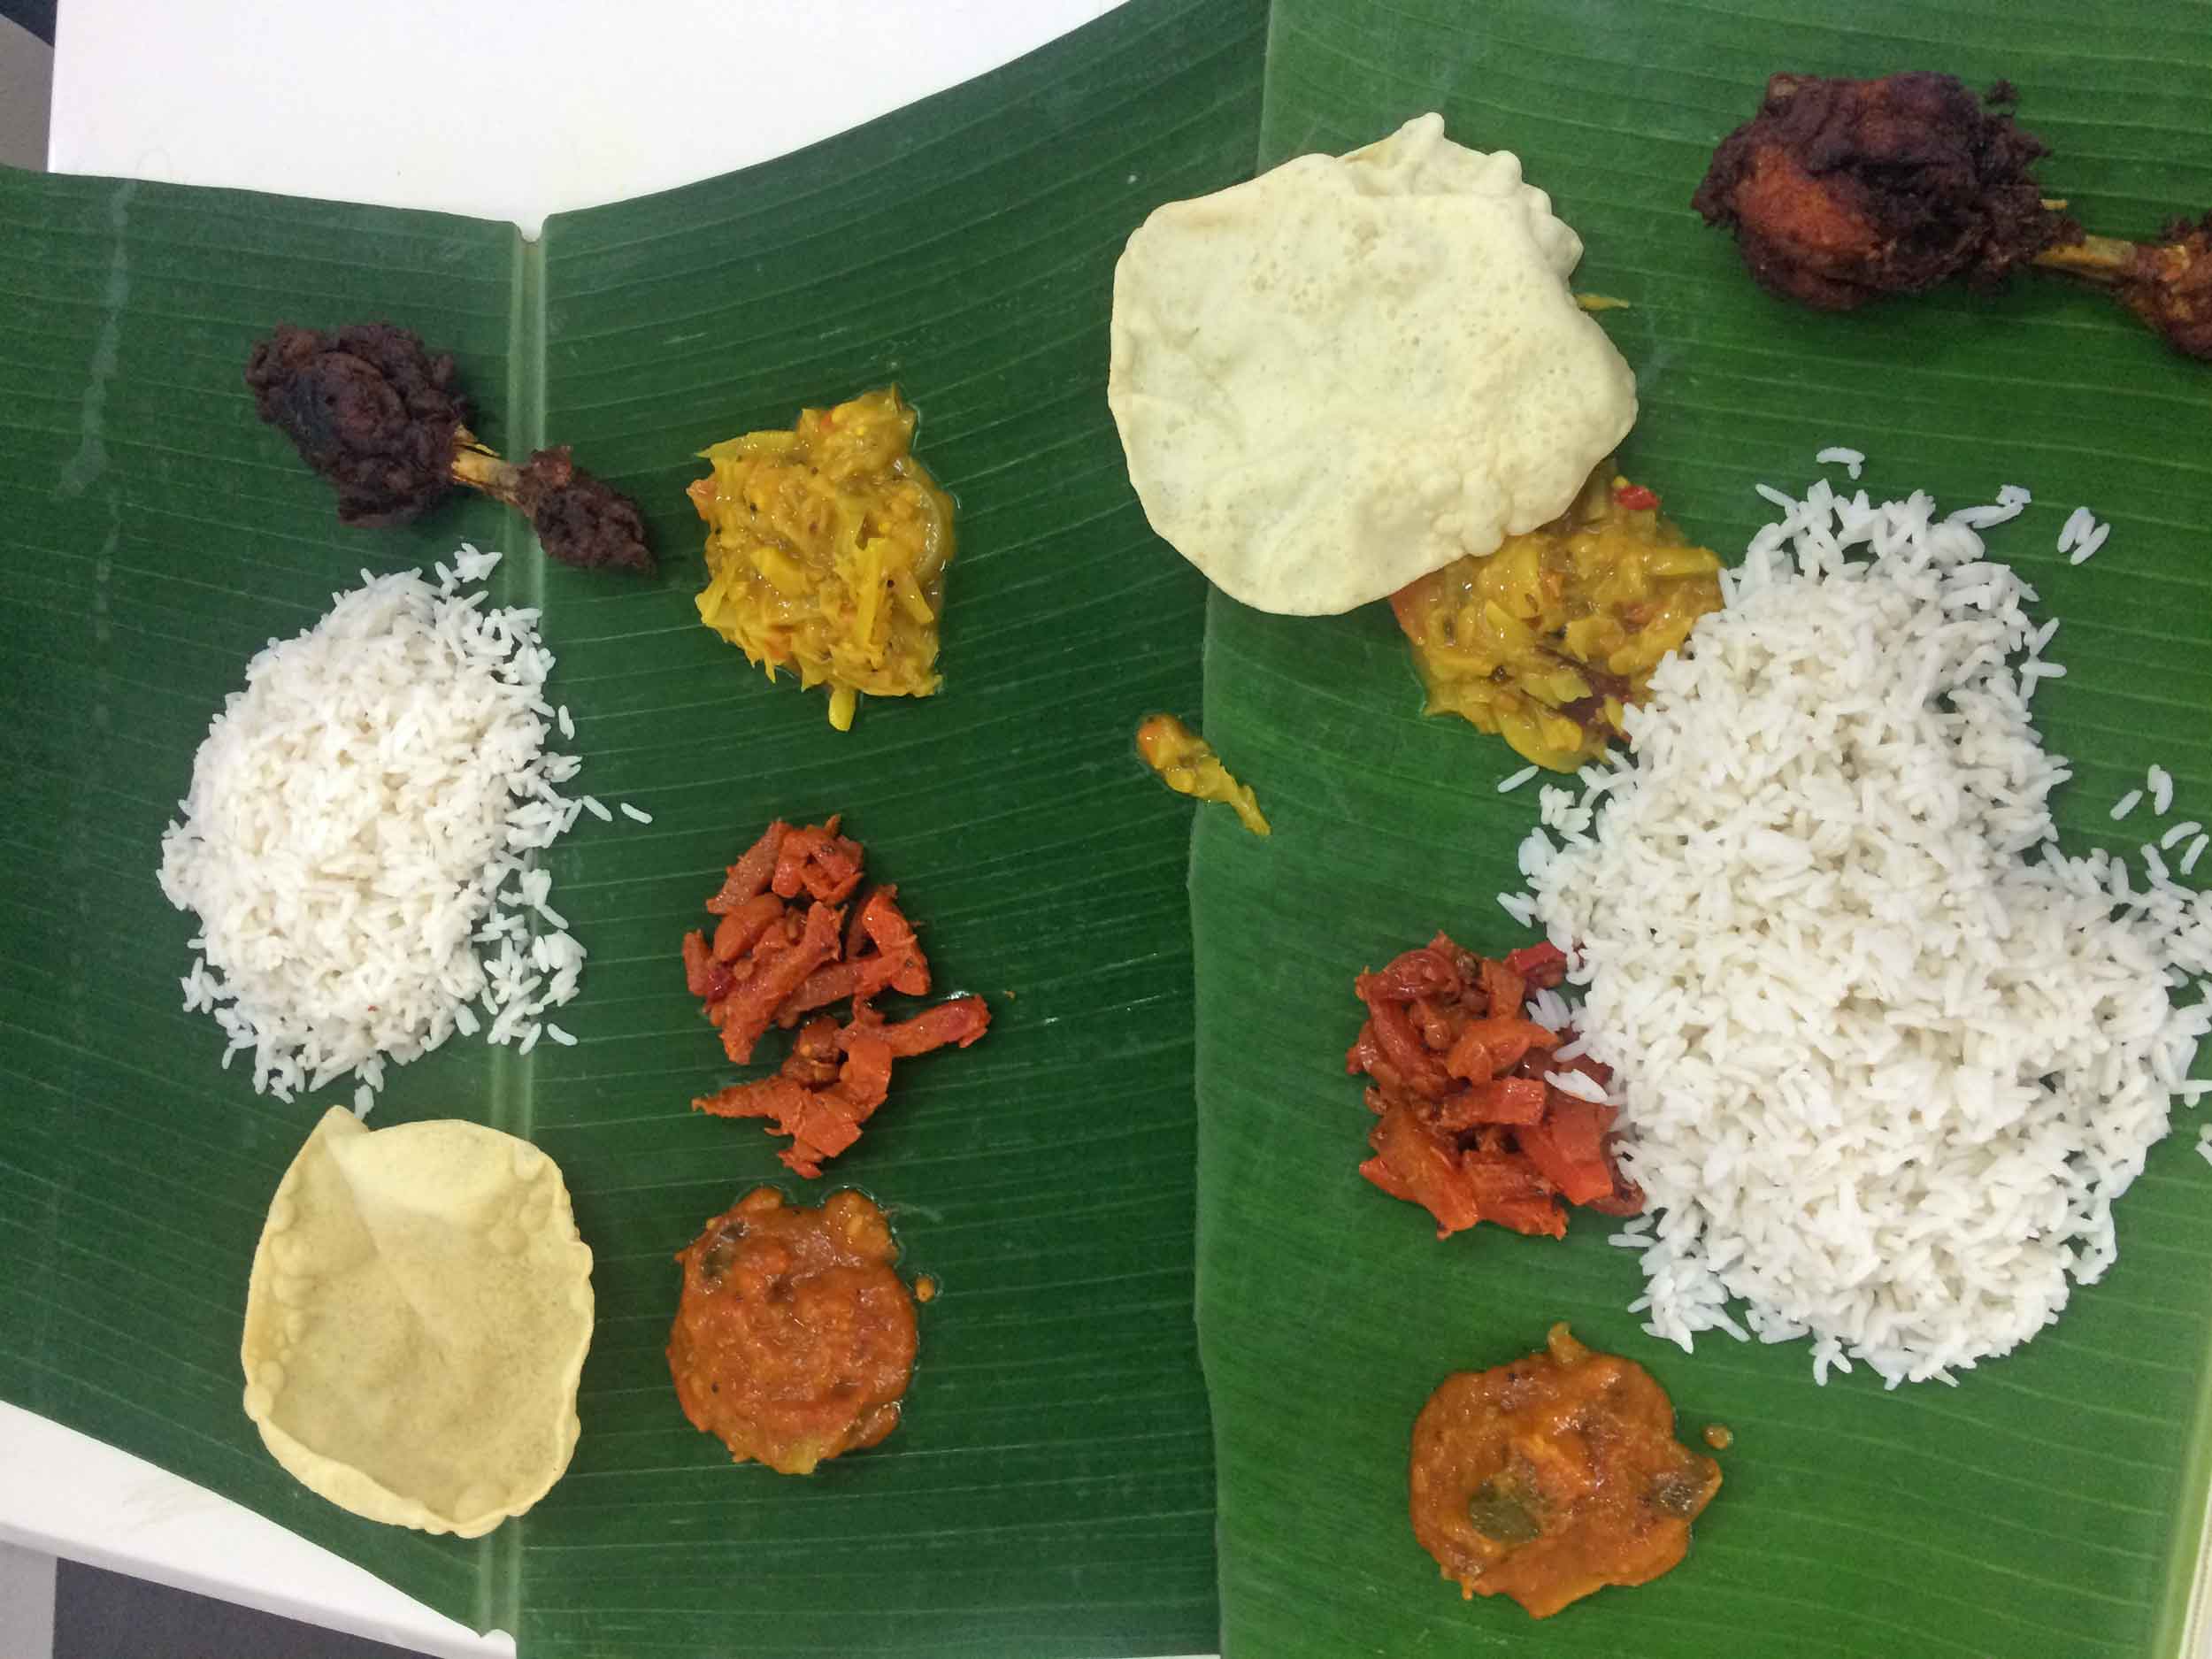  We chose a restaurant known for its  banana leaf rice and chicken curry .&nbsp; 